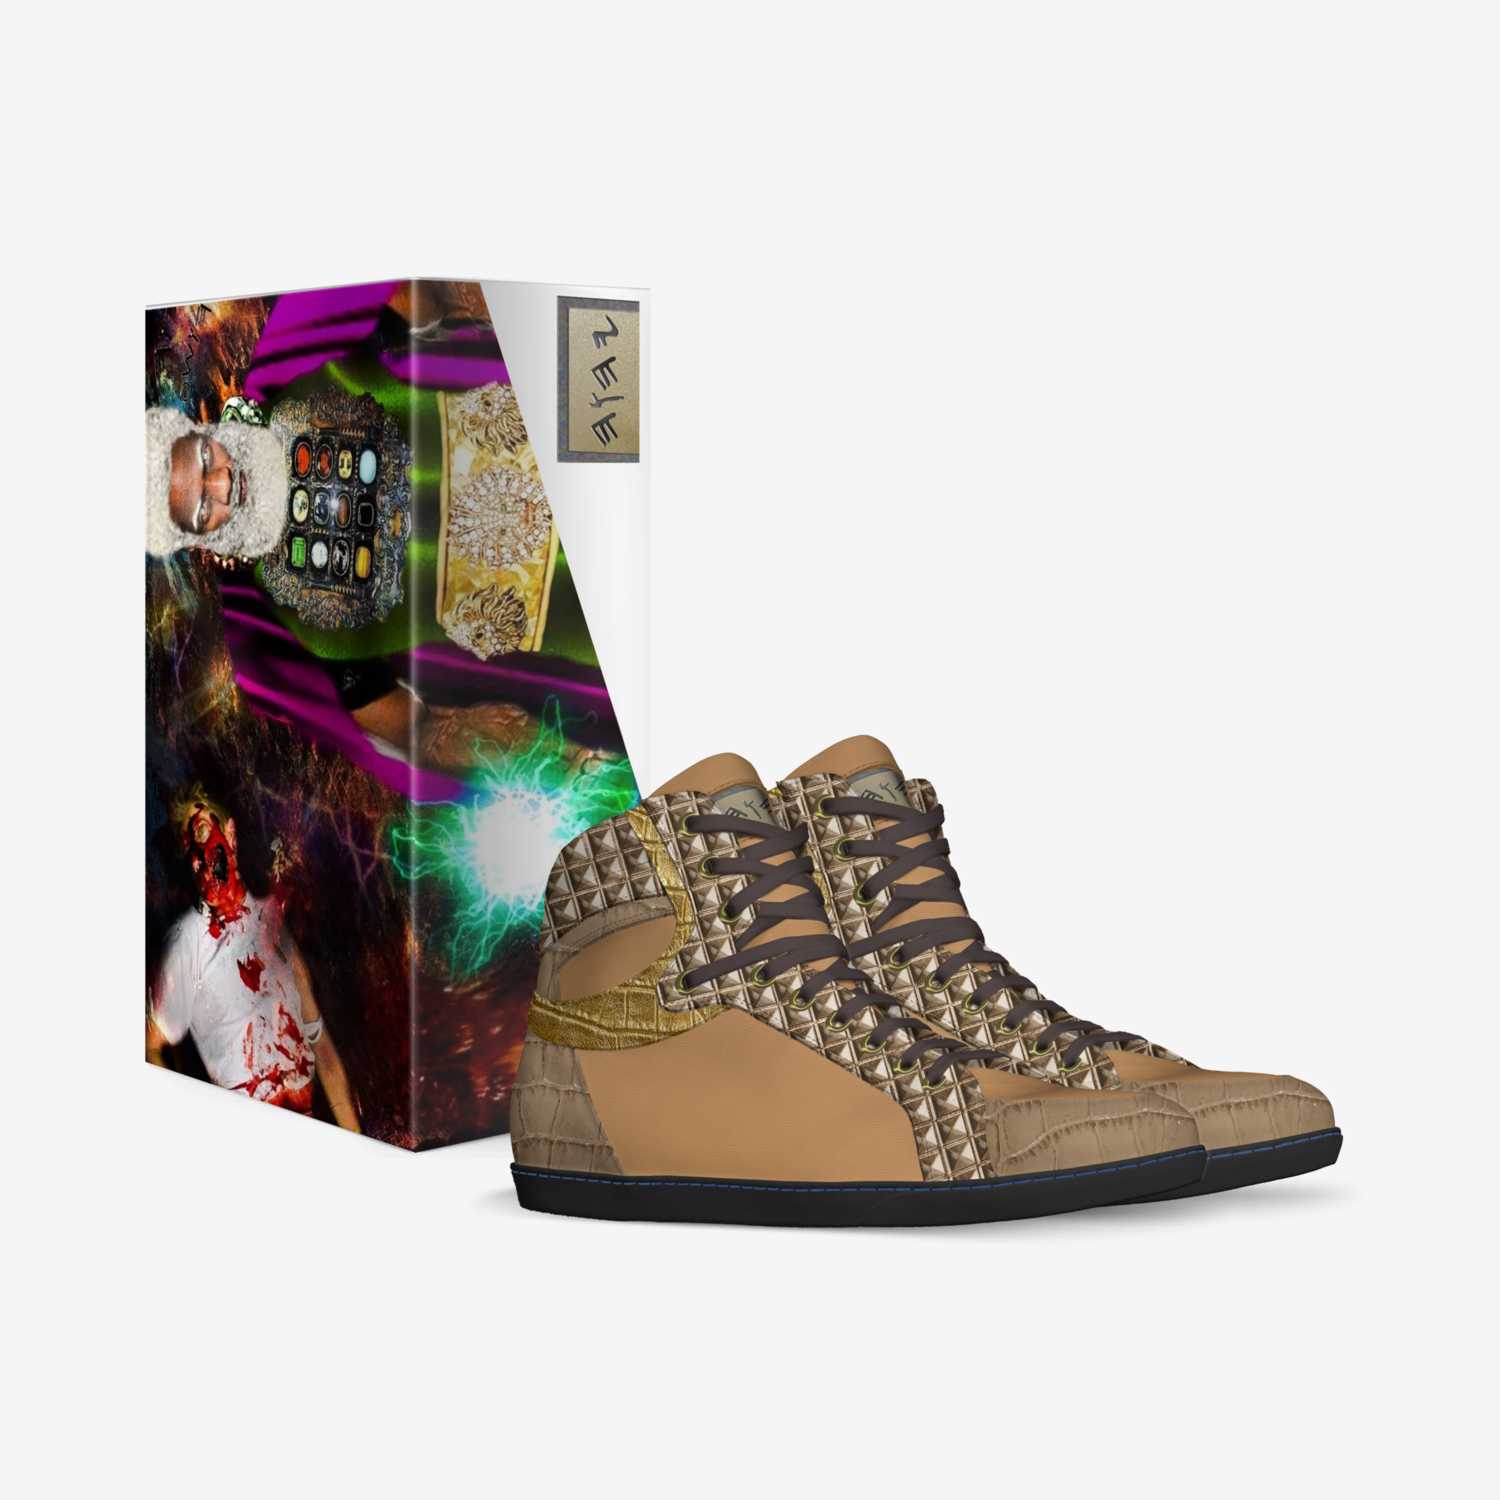 HEBREW ISRAELITES custom made in Italy shoes by Andre Butler | Box view